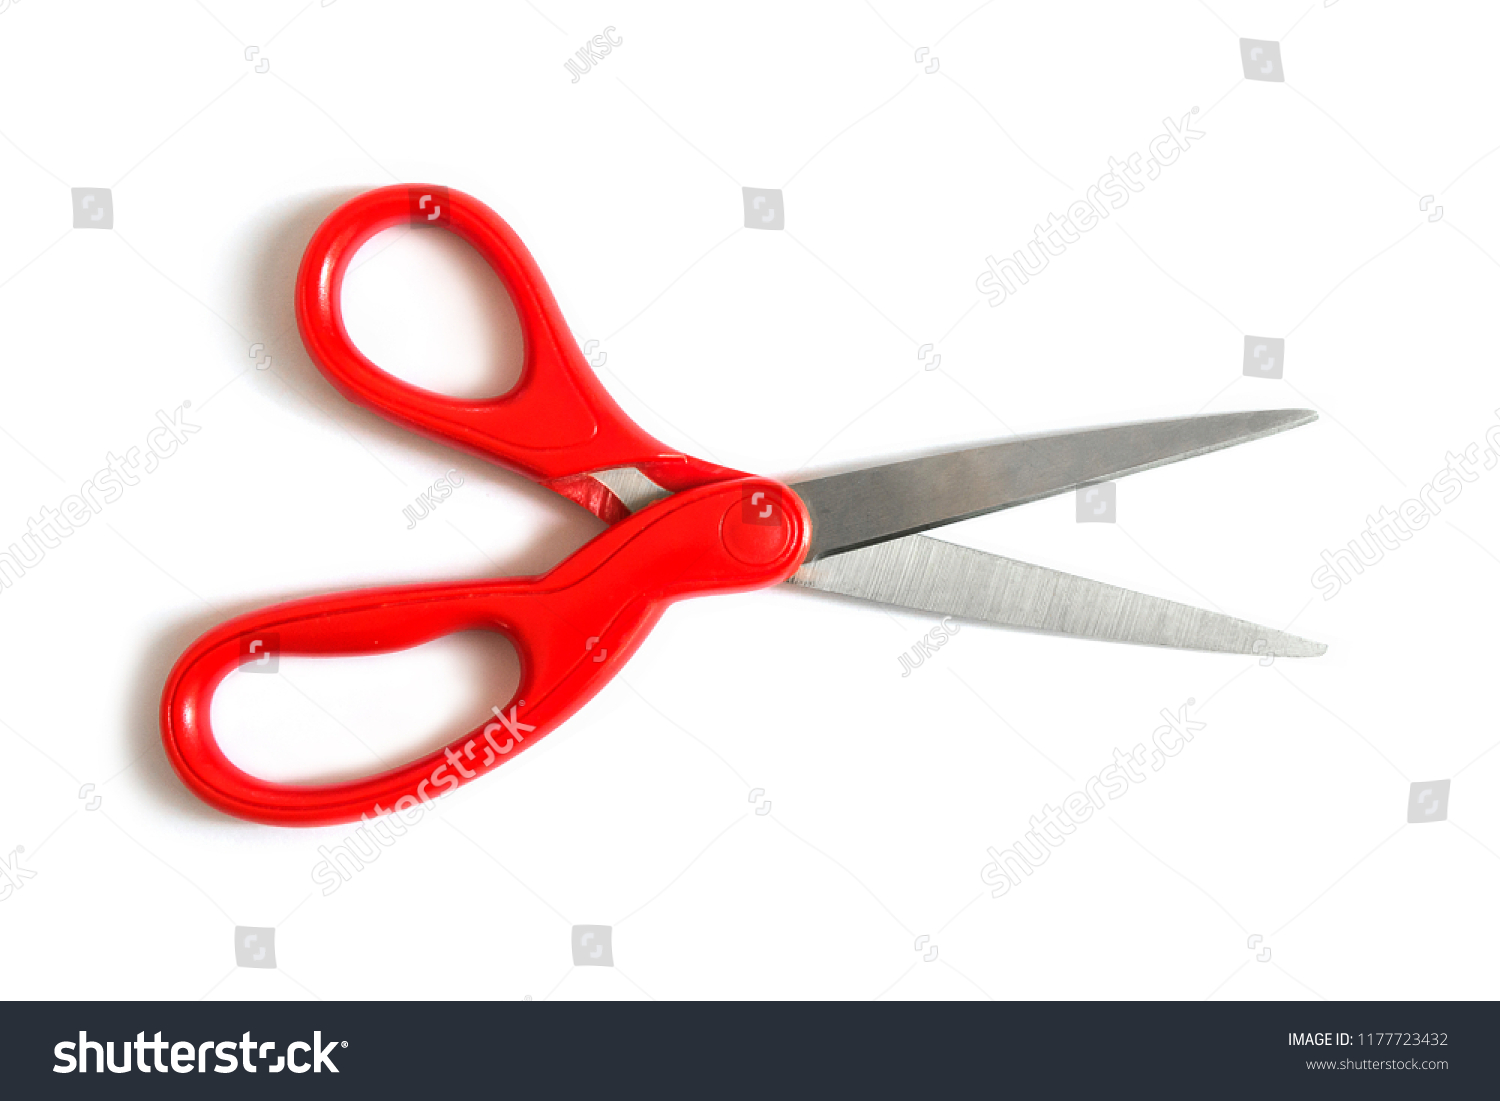 Red scissors isolated on white background #1177723432